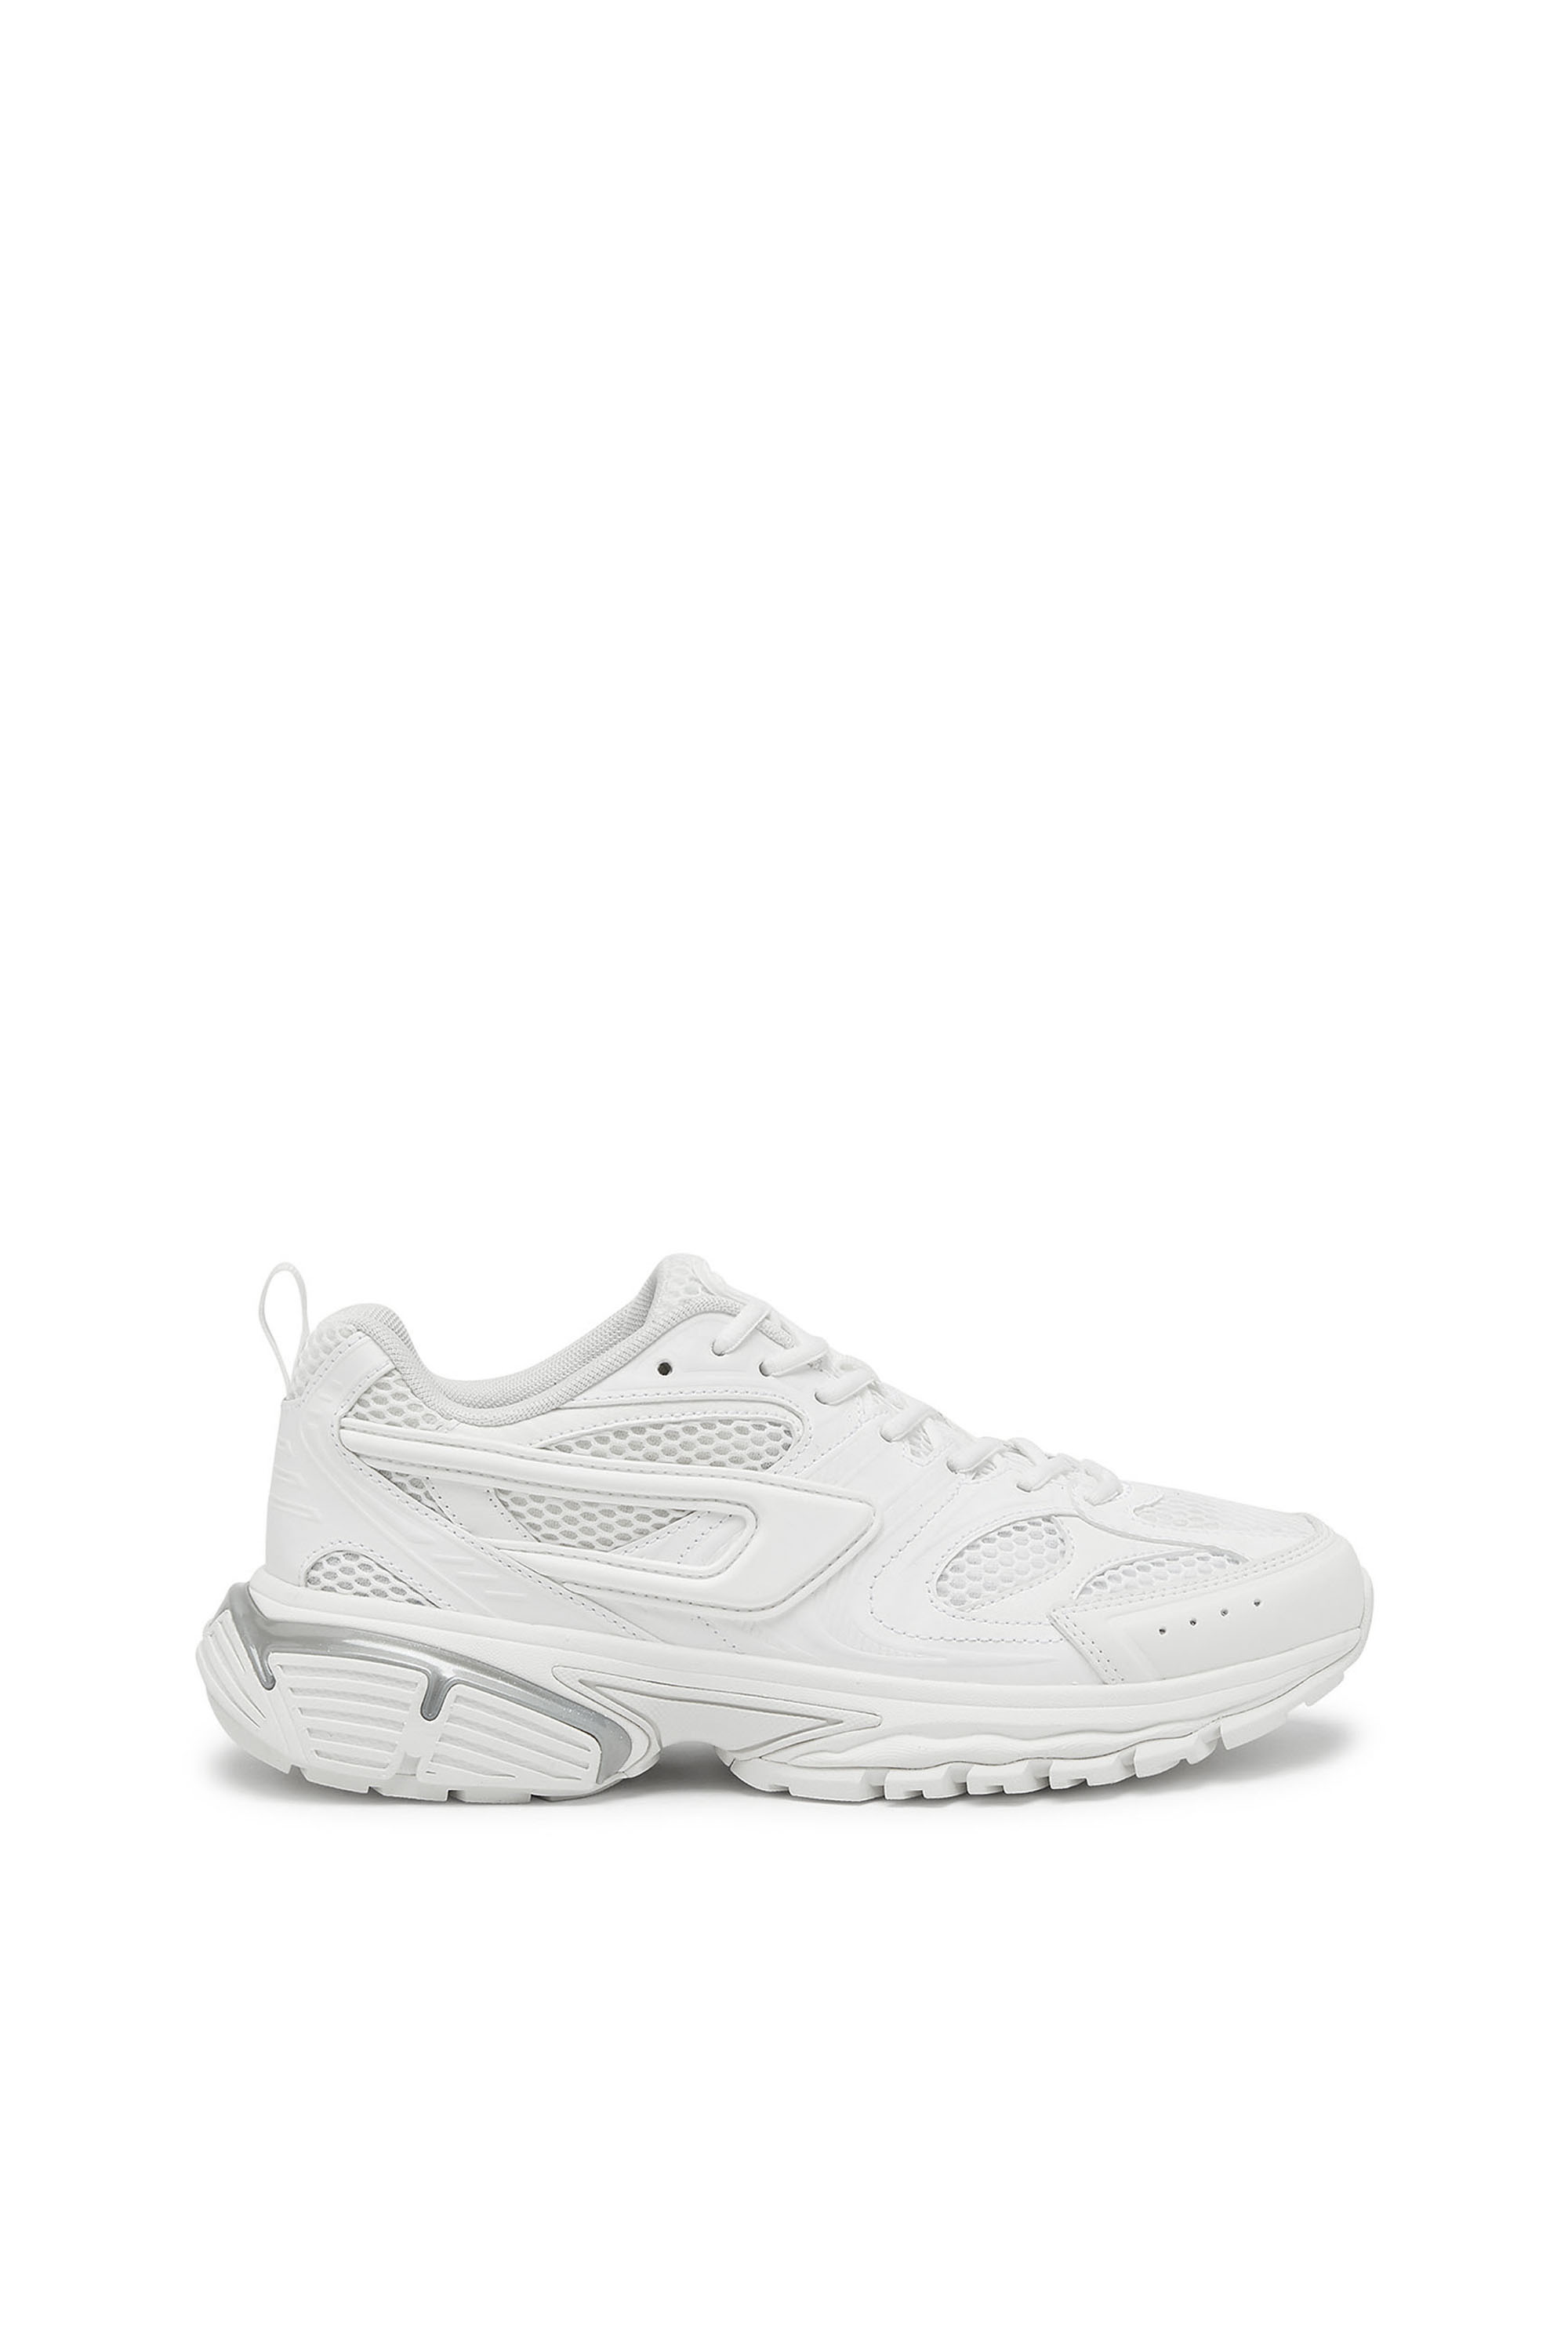 Diesel - S-Serendipity Pro-X1 - Monochrome sneakers in mesh and PU - Sneakers - Woman - White